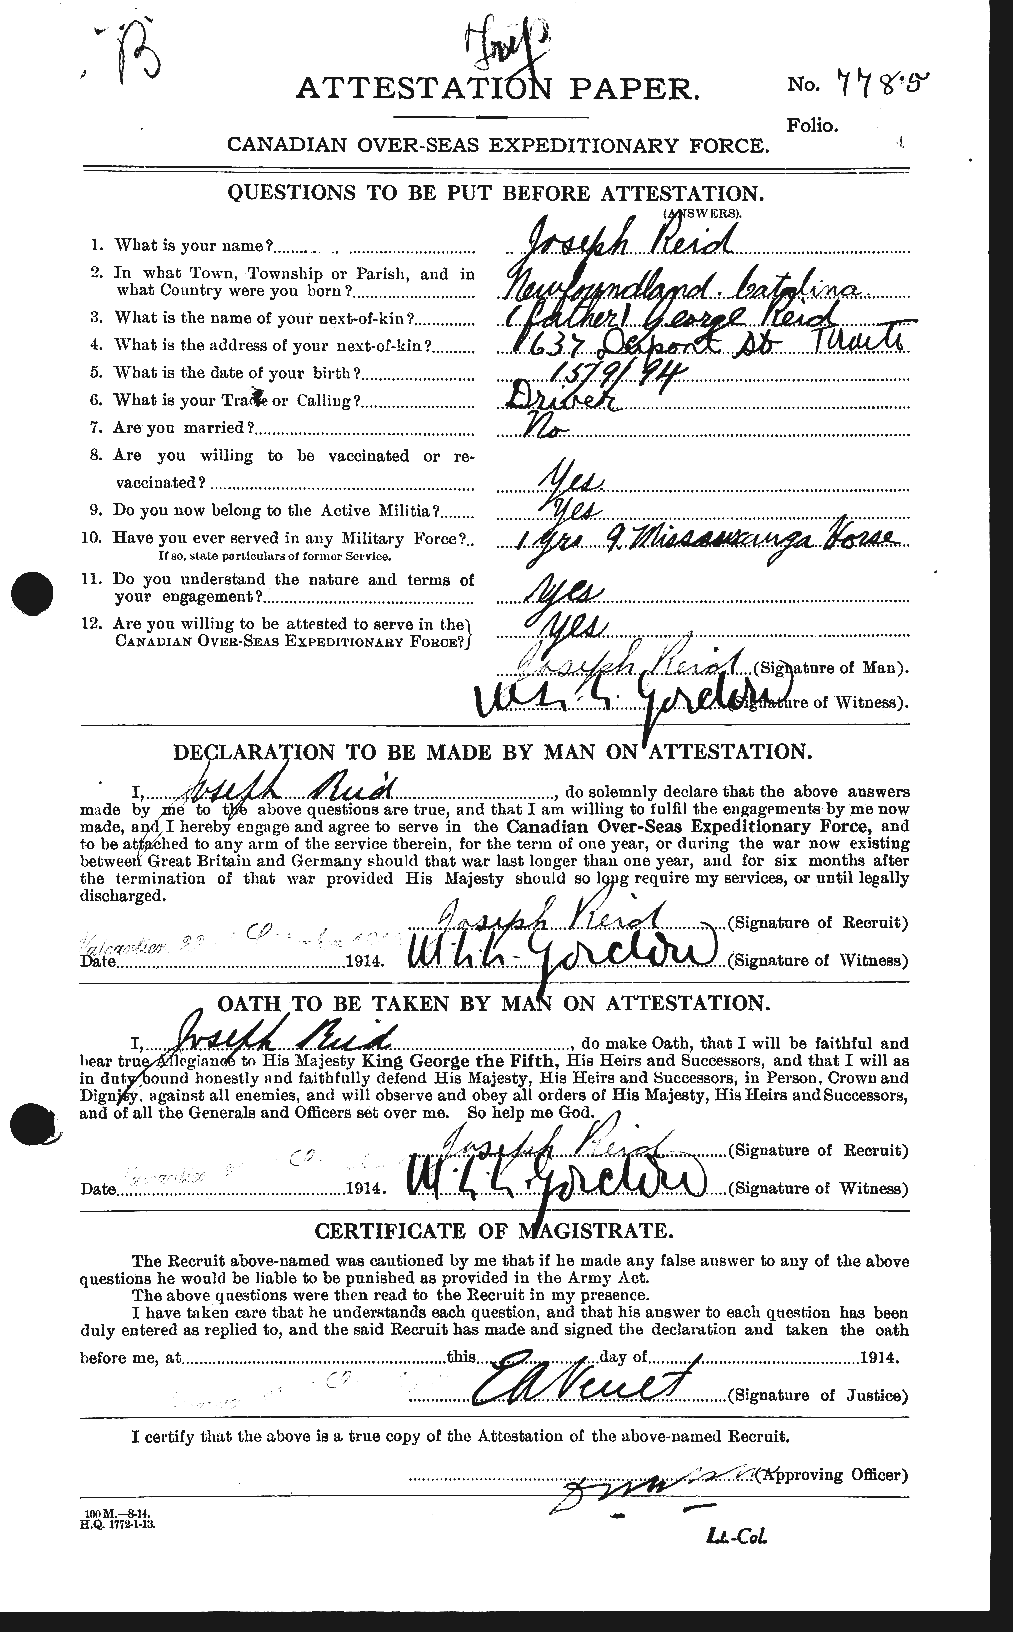 Personnel Records of the First World War - CEF 598891a